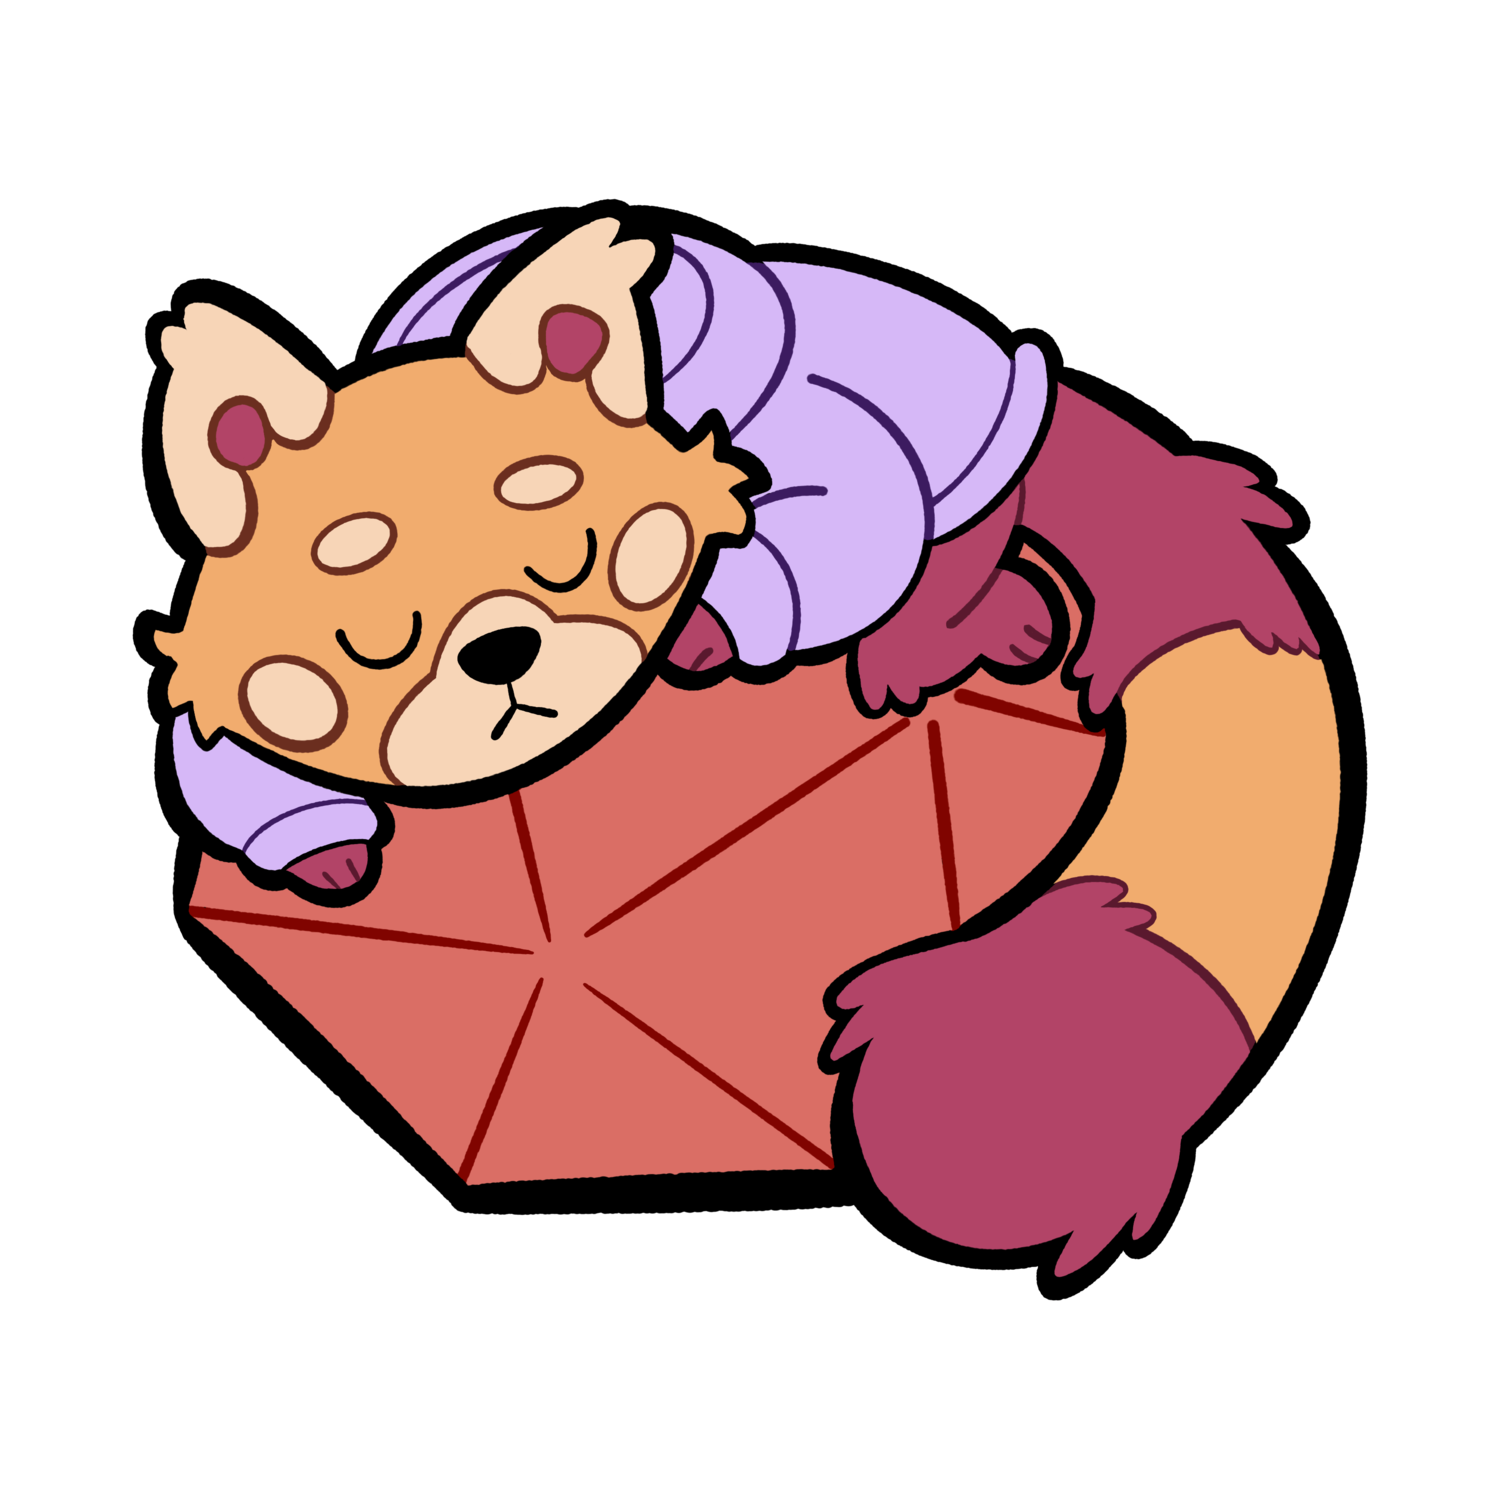 Red Panda Dice and Delights